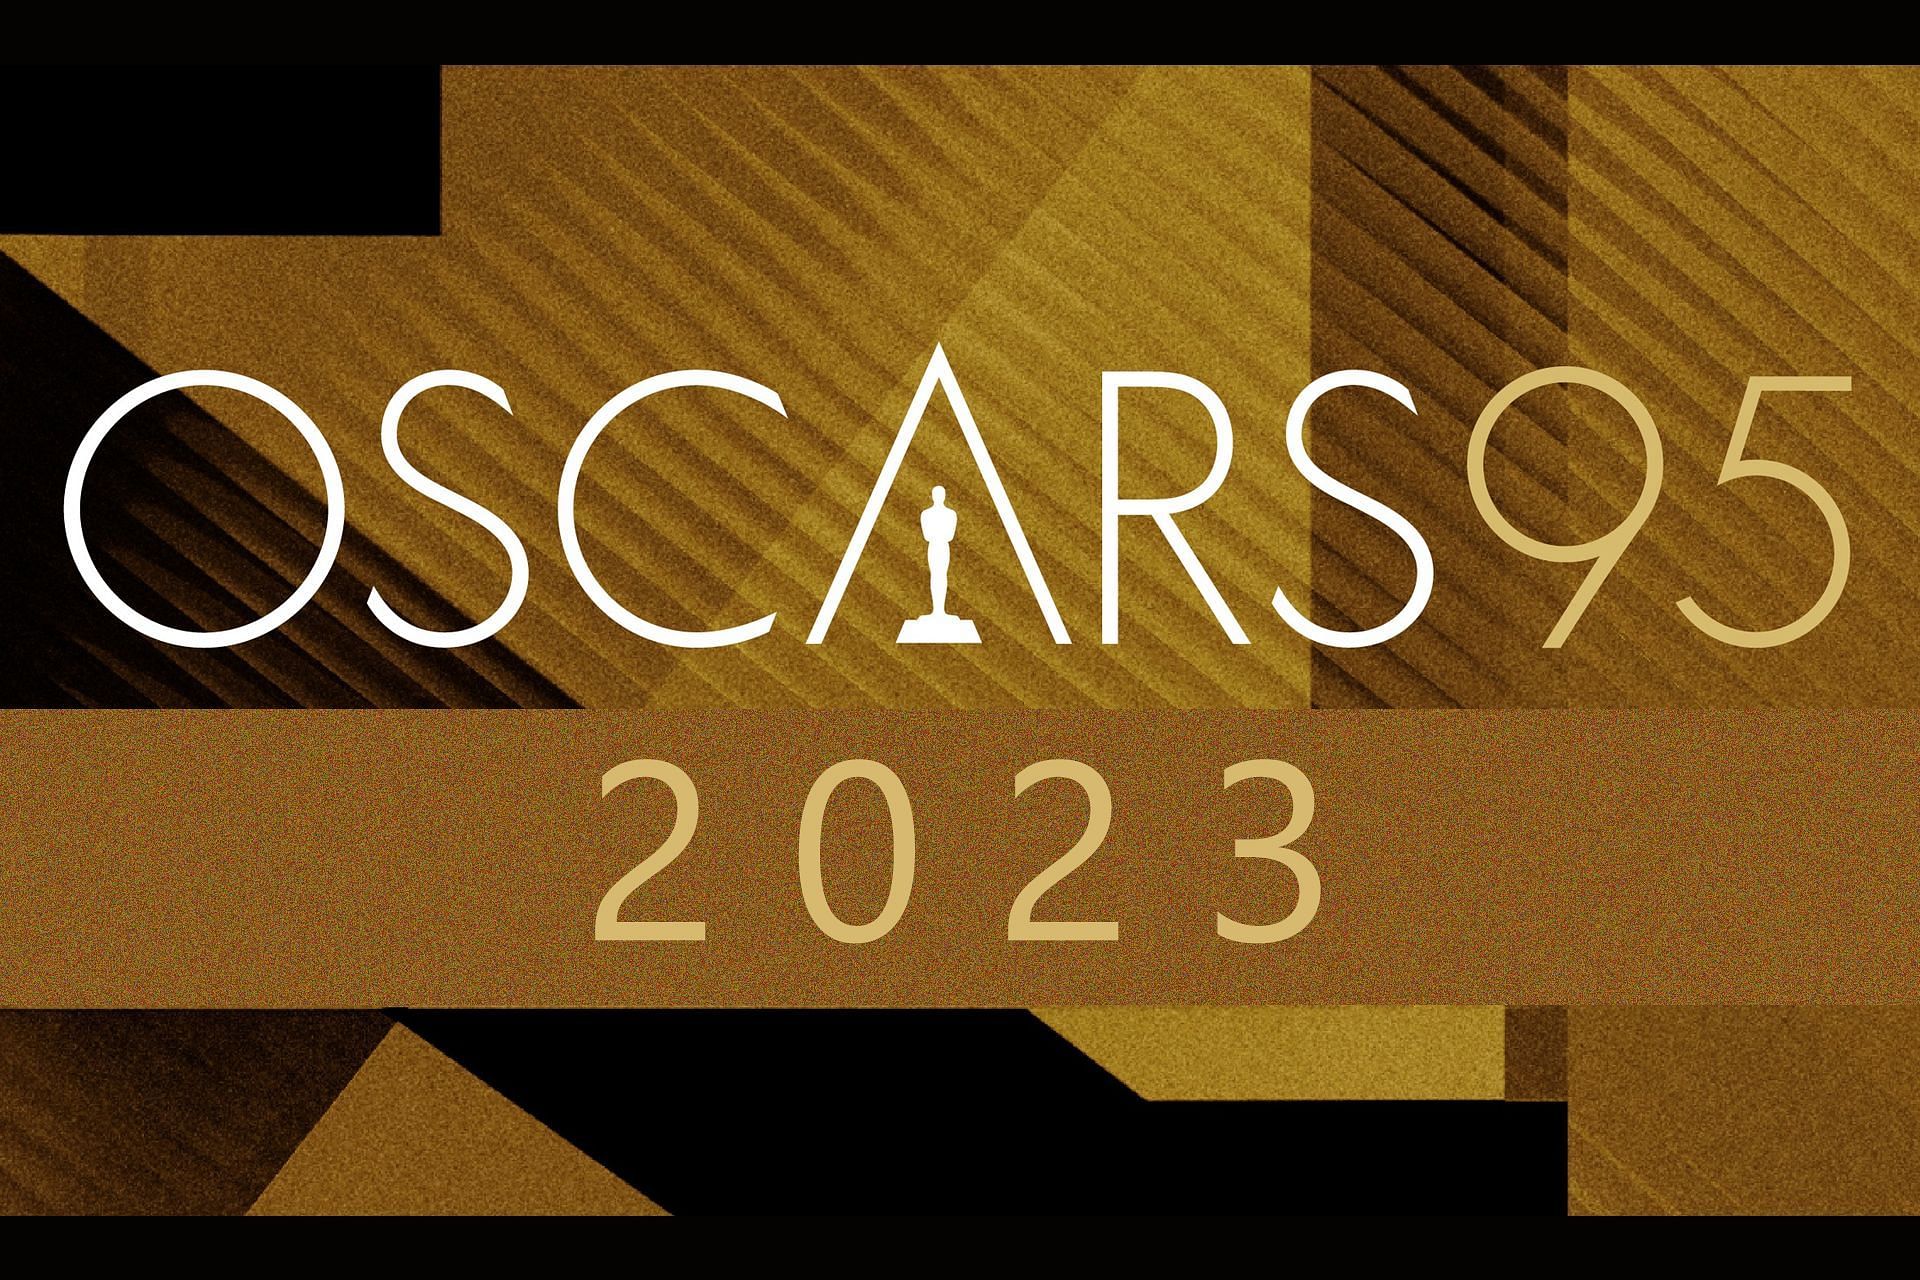 The 95th Academy Awards will be held on March 12, 2023 (Image via oscars.org) 